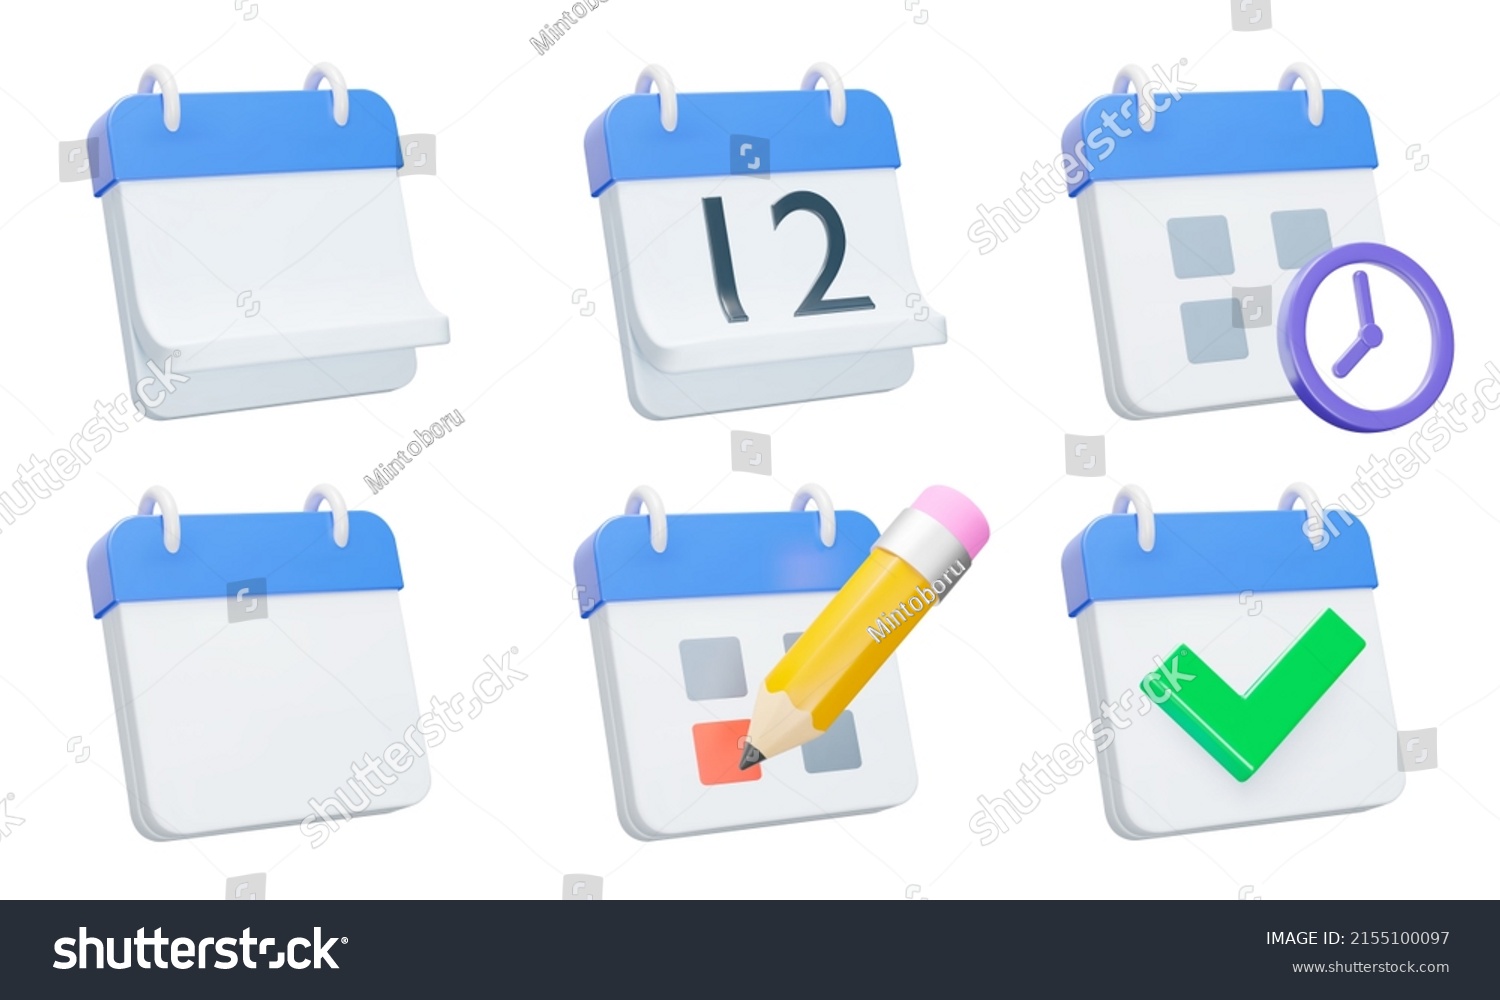 SVG of Calendar icon set. Calendars with a bent or straight page, date, time, highlight important date, check mark. Isolated 3d icons, objects on a transparent background svg